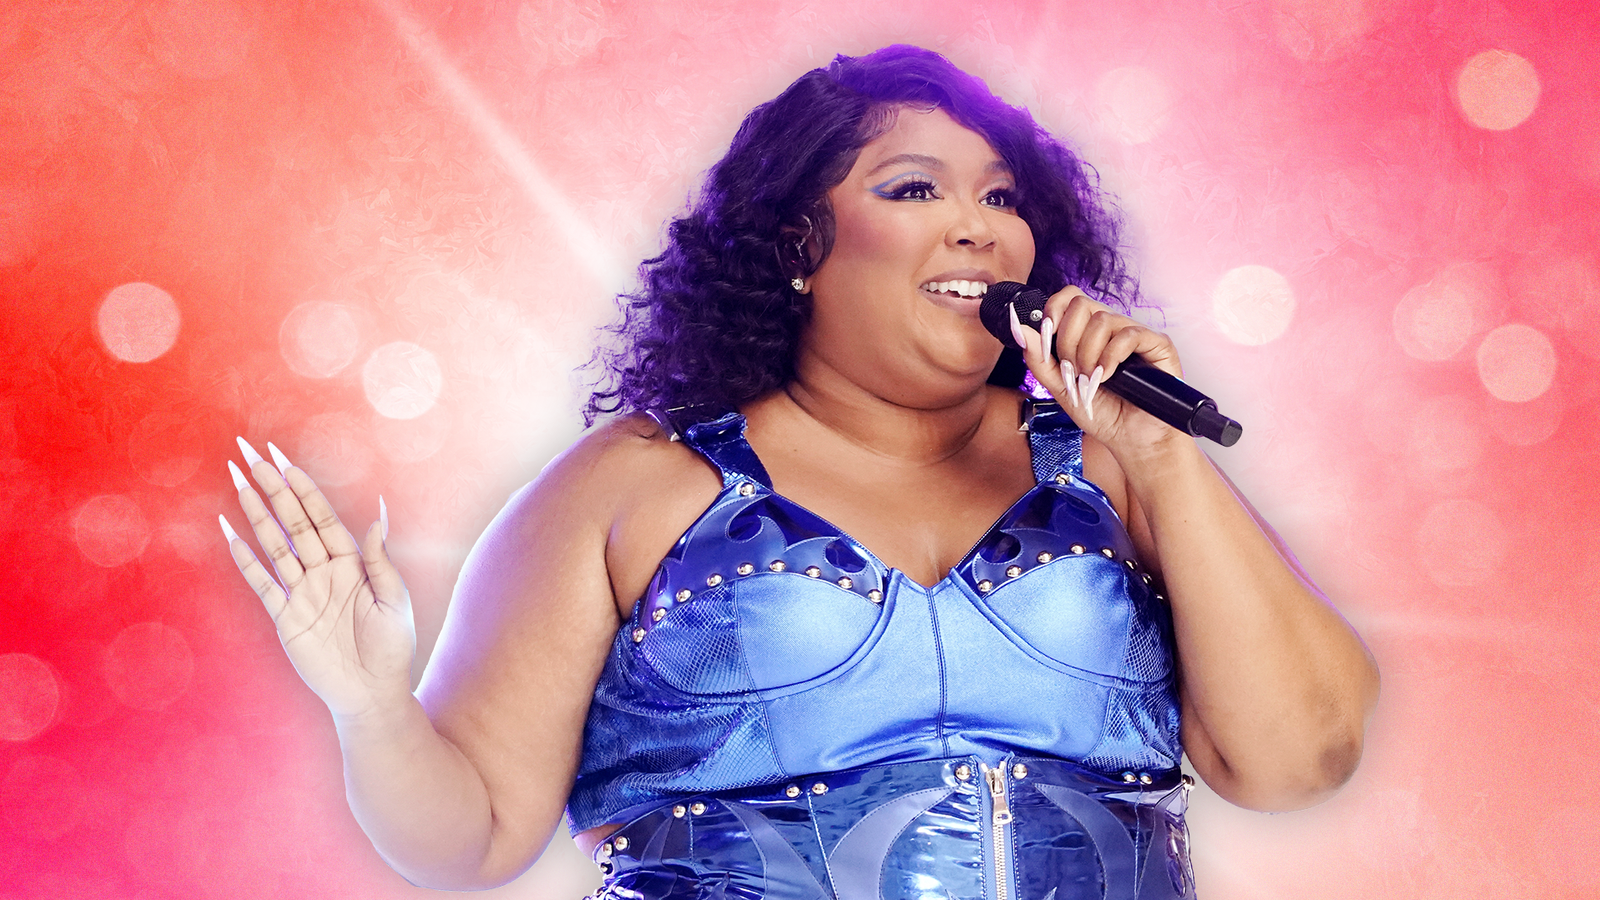 Lizzo's future is hanging in the balance - will she survive?